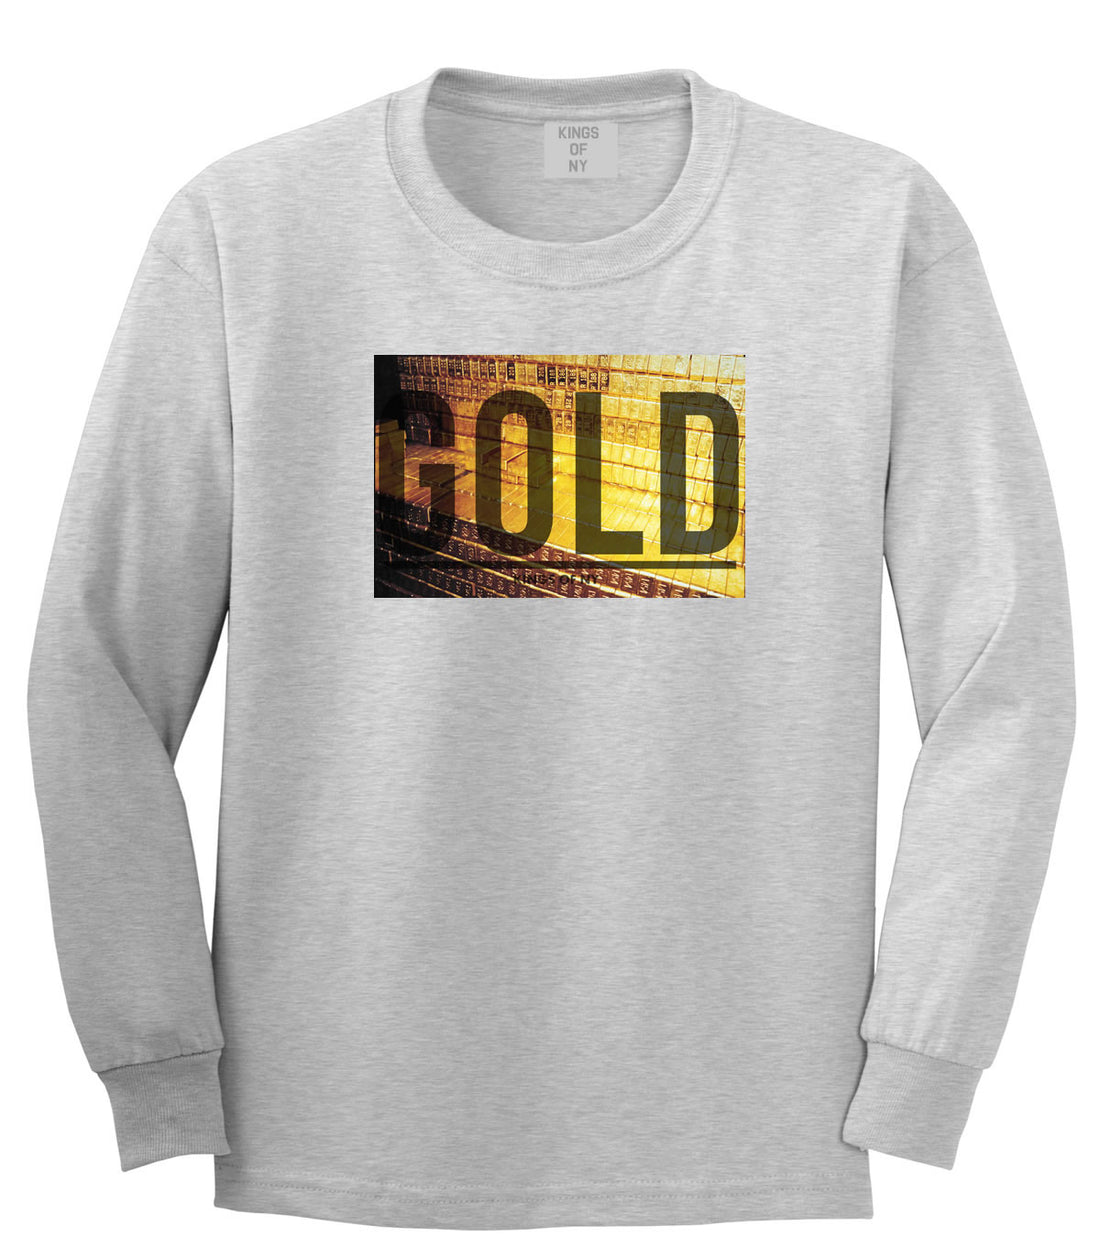 Gold Bricks Money Luxury Bank Cash Long Sleeve T-Shirt In Grey by Kings Of NY